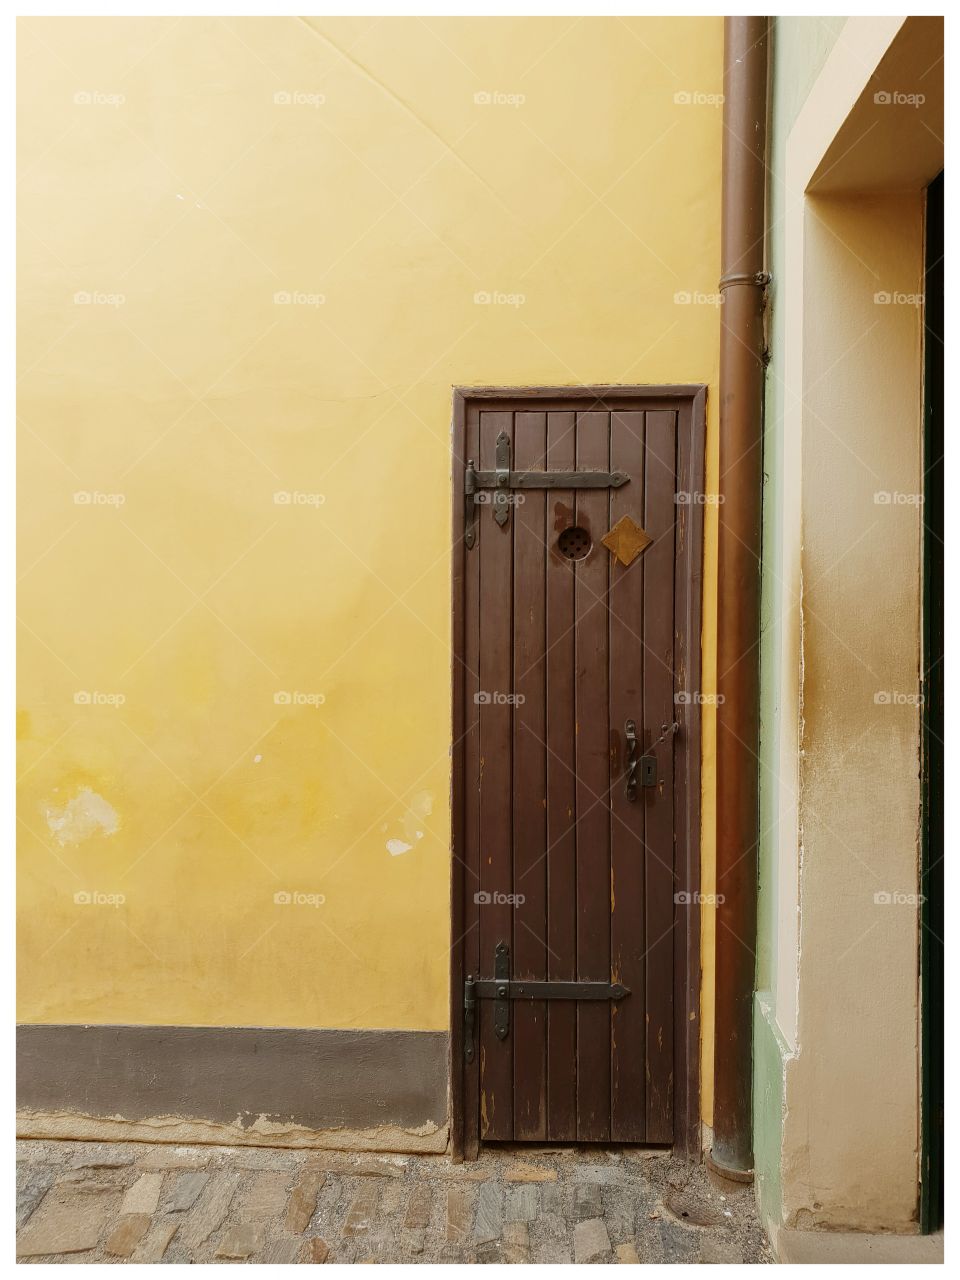 In a small empty street I found this little door. Beautiful yellow wall!